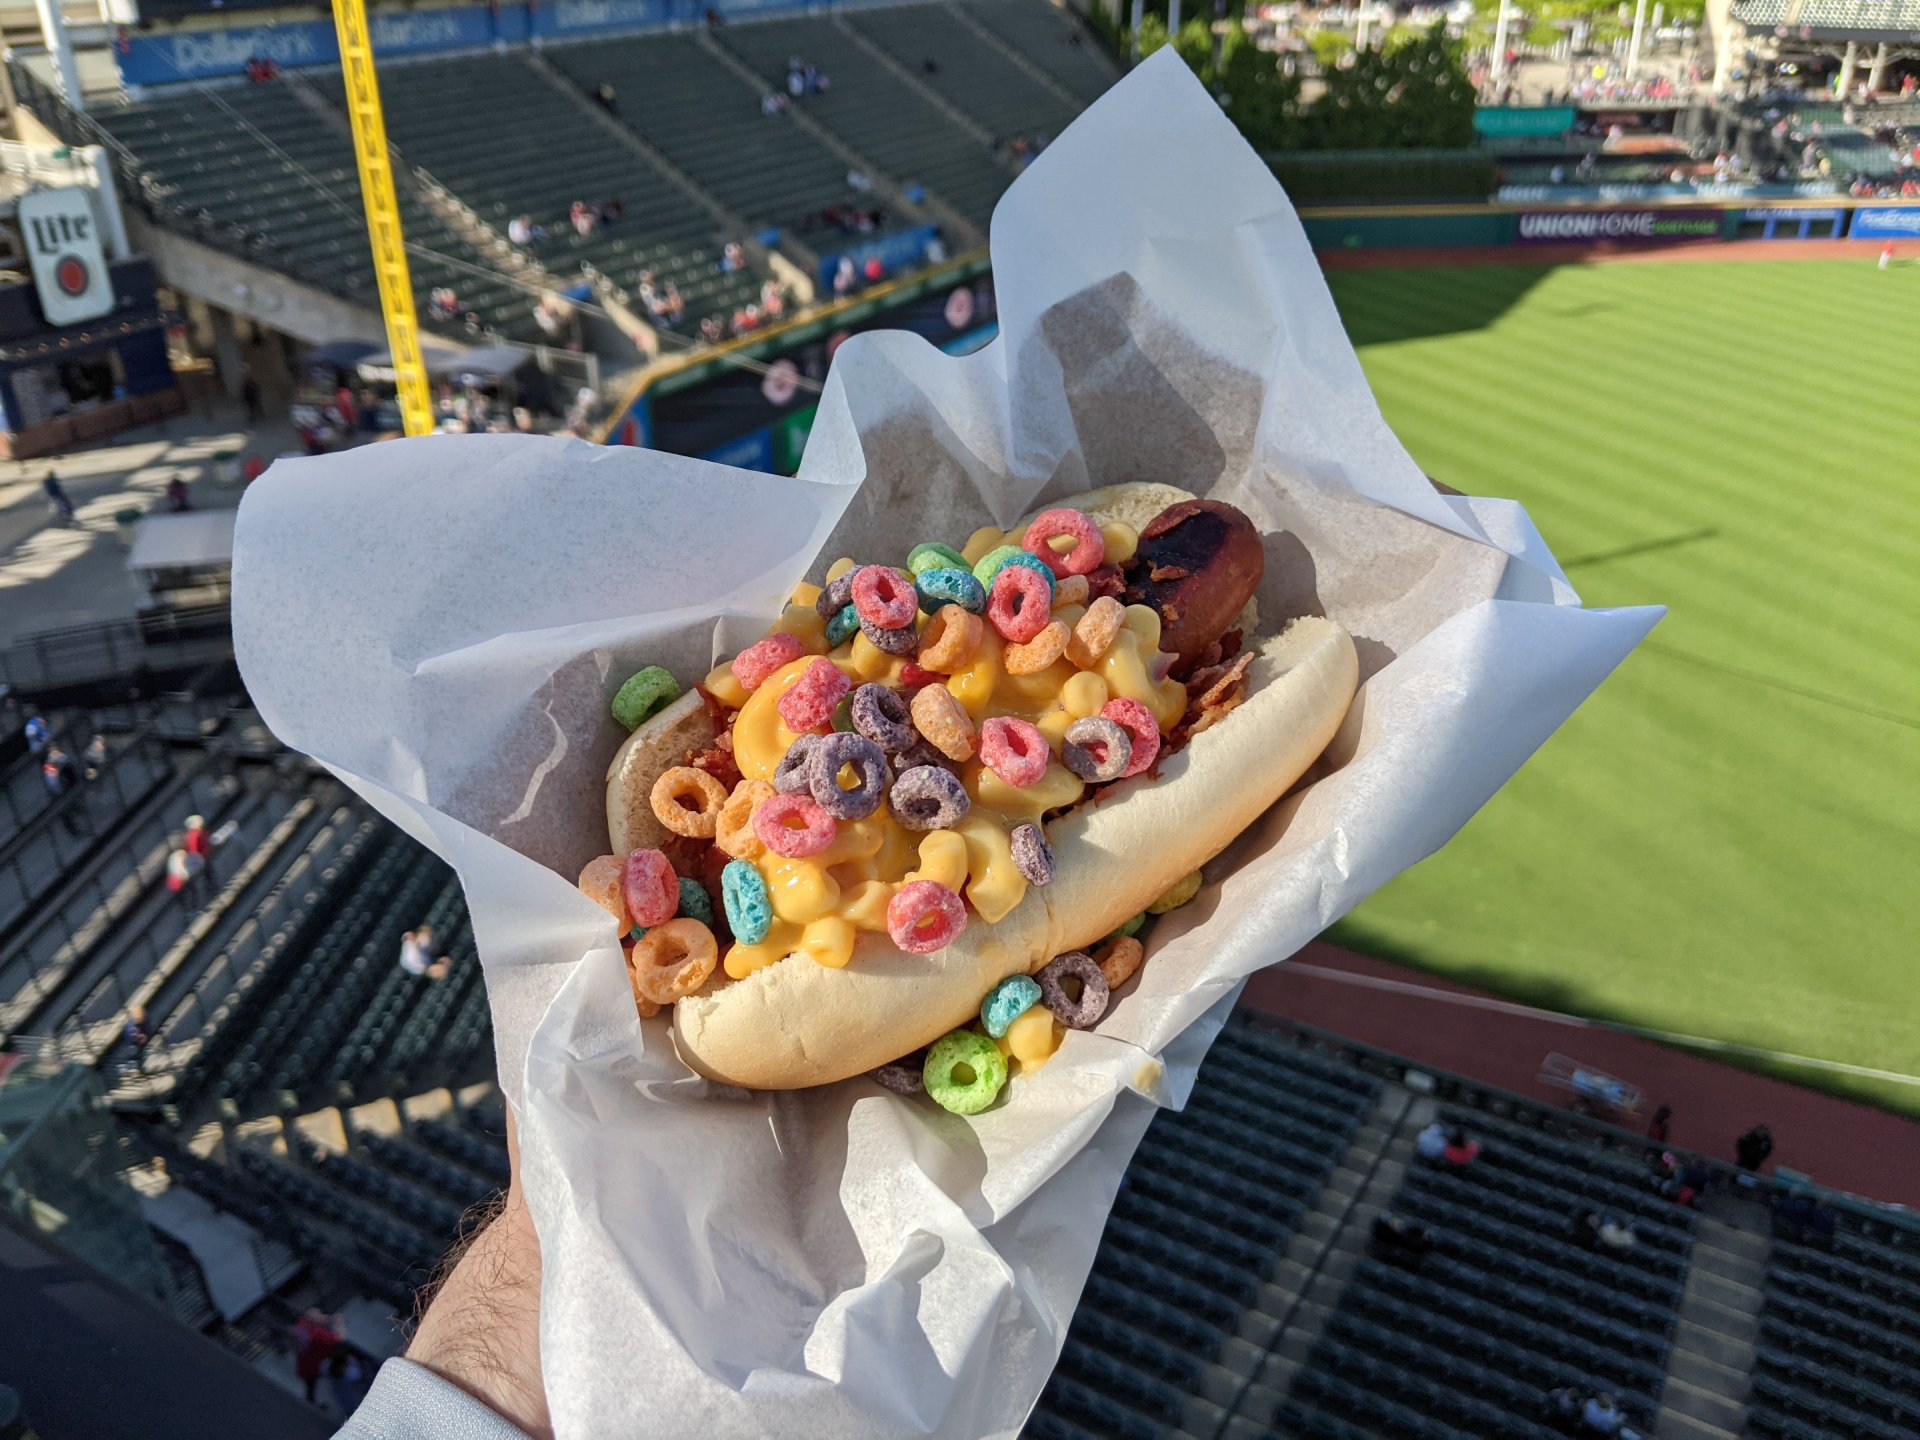 Progressive Field has a variety of standard and unusual items, including a hot dog topped with cereal.